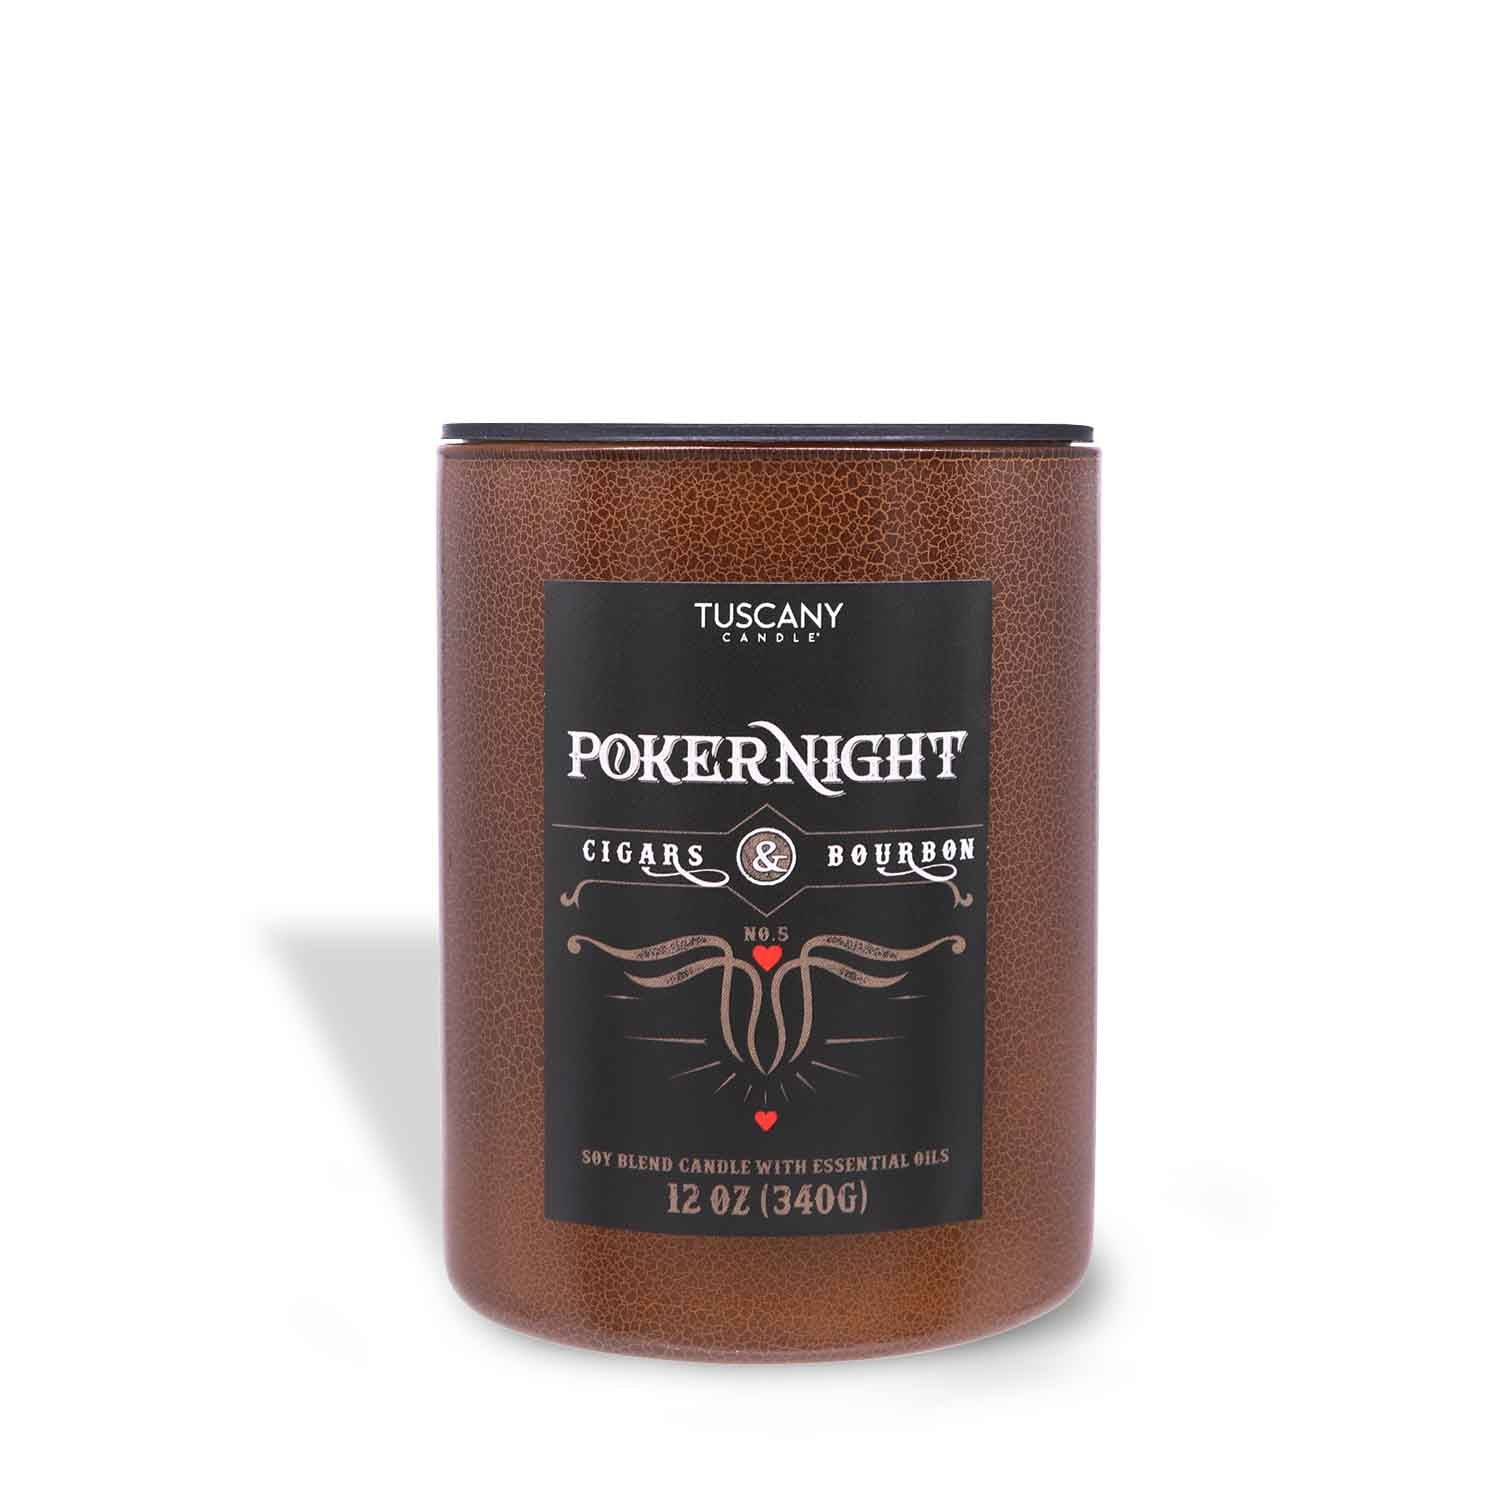 A Poker Night Scented Jar Candle (12 oz) from the Rugged Retreat Collection by Tuscany Candle® SEASONAL, featuring the aroma of dried tobacco leaves and a hint of vanilla bourbon.